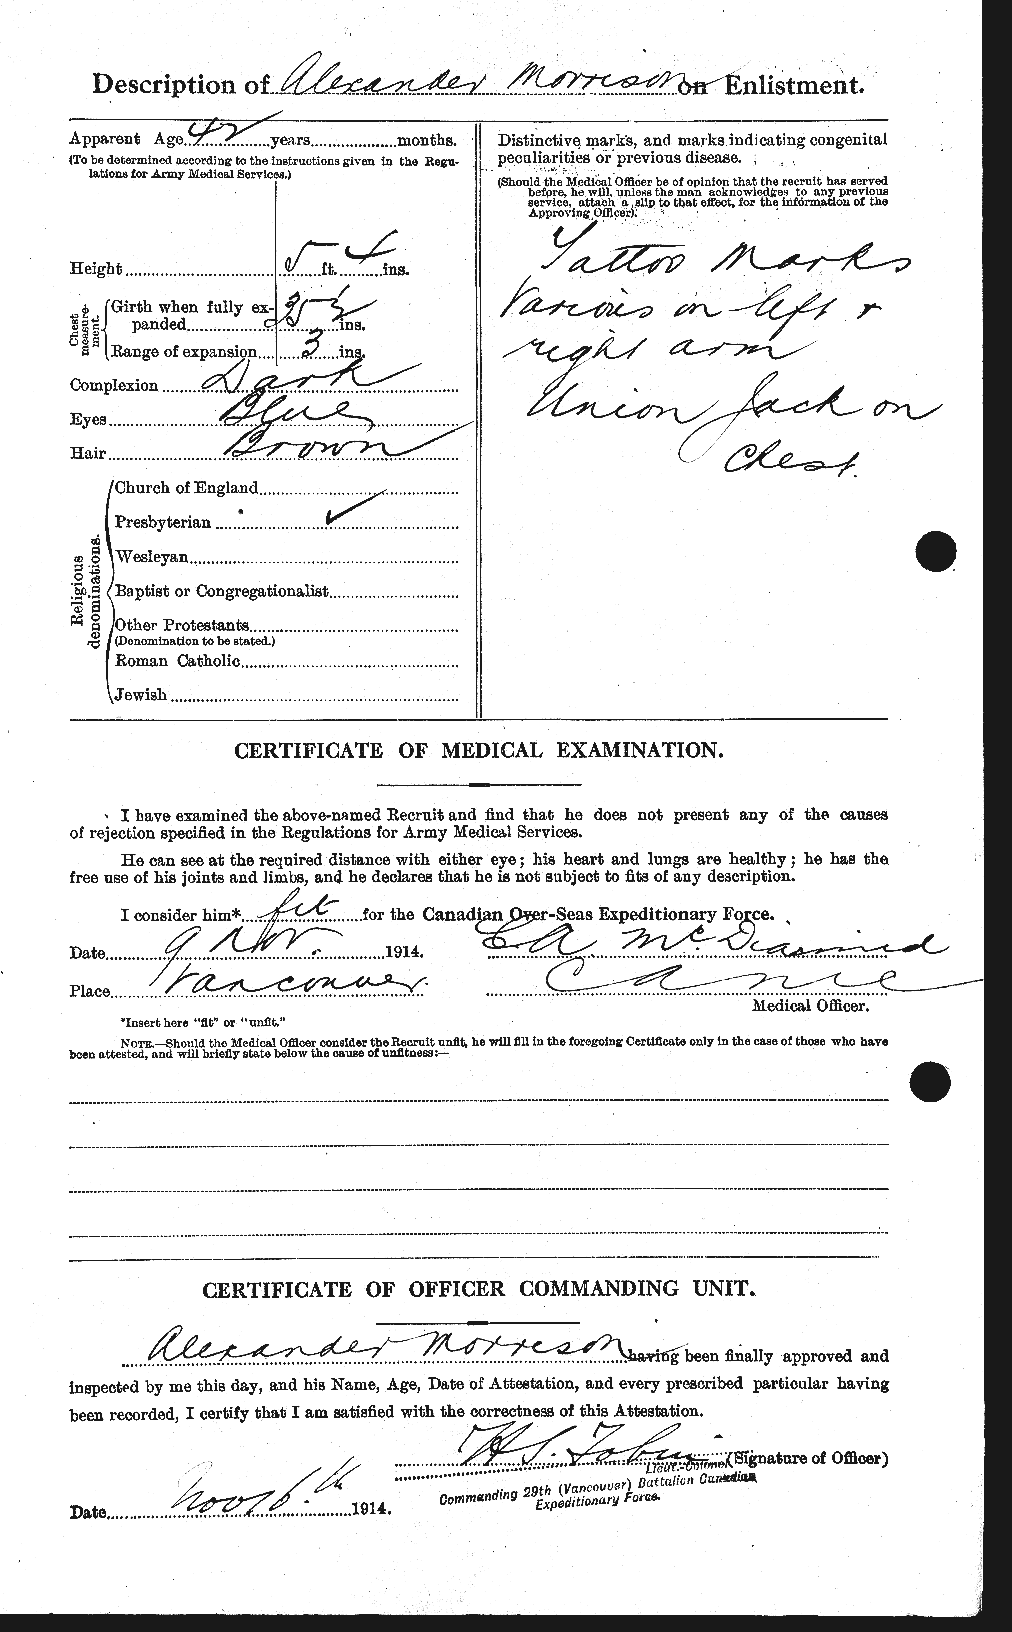 Personnel Records of the First World War - CEF 510982b